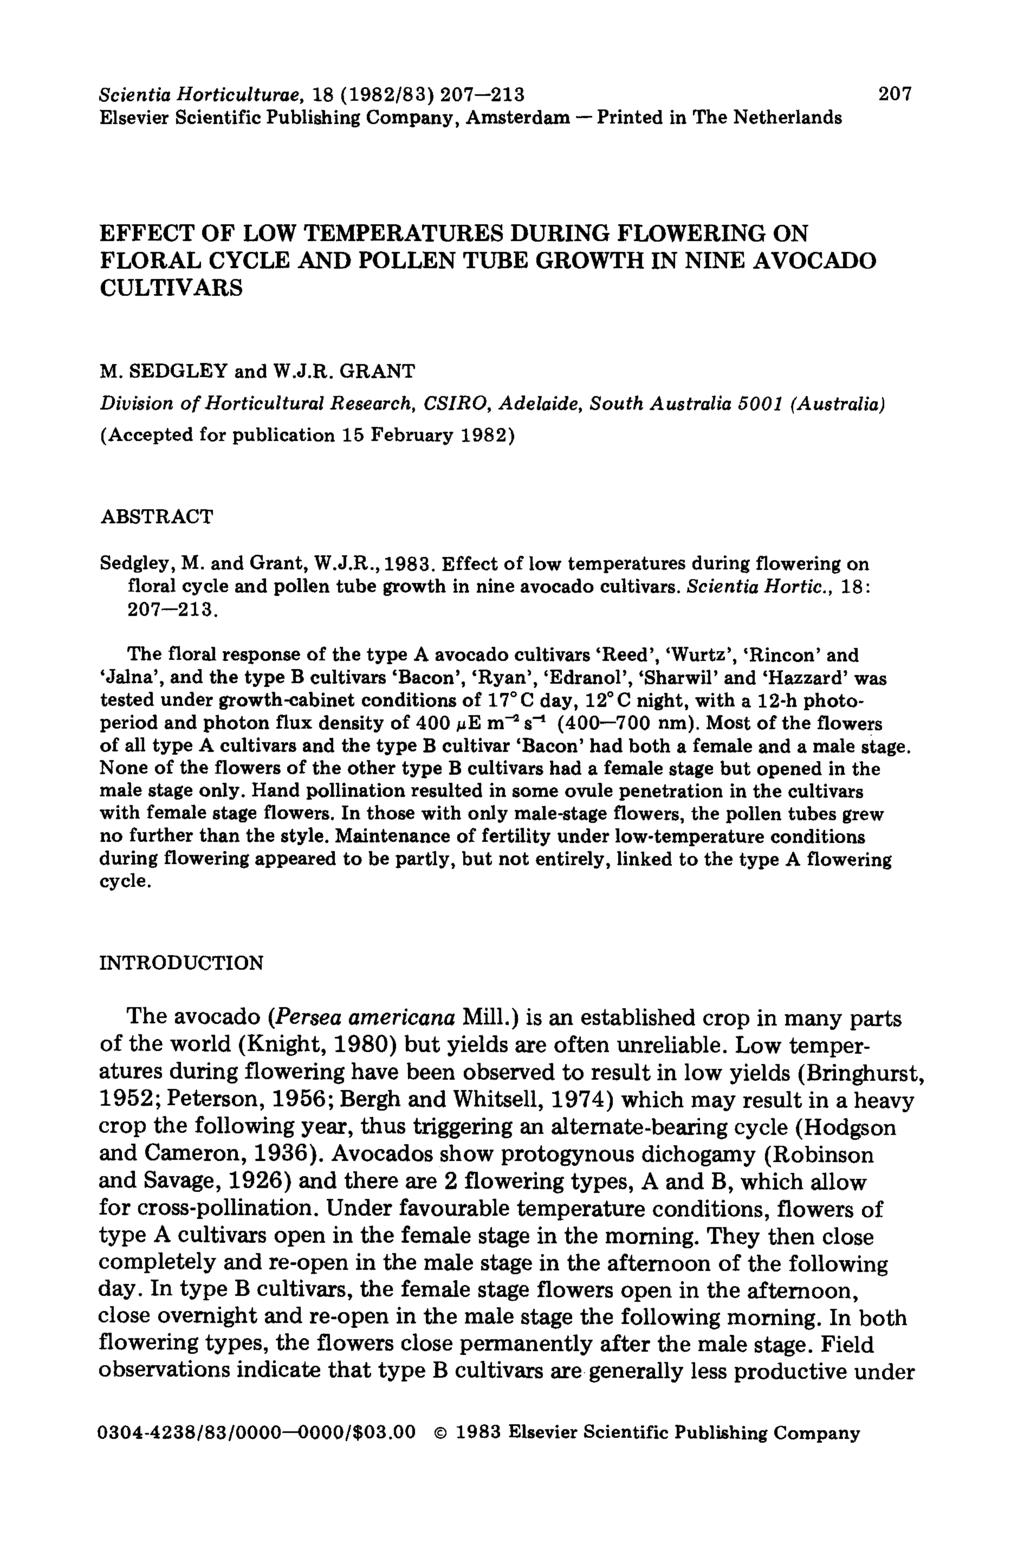 Seientia Horticulturae, 18 (1982/83) 27--213 27 Elsevier Scientific Publishing Company, Amsterdam -- Printed in The Netherlands EFFECT OF LOW TEMPERATURES DURING FLOWERING ON FLORAL CYCLE AND POLLEN